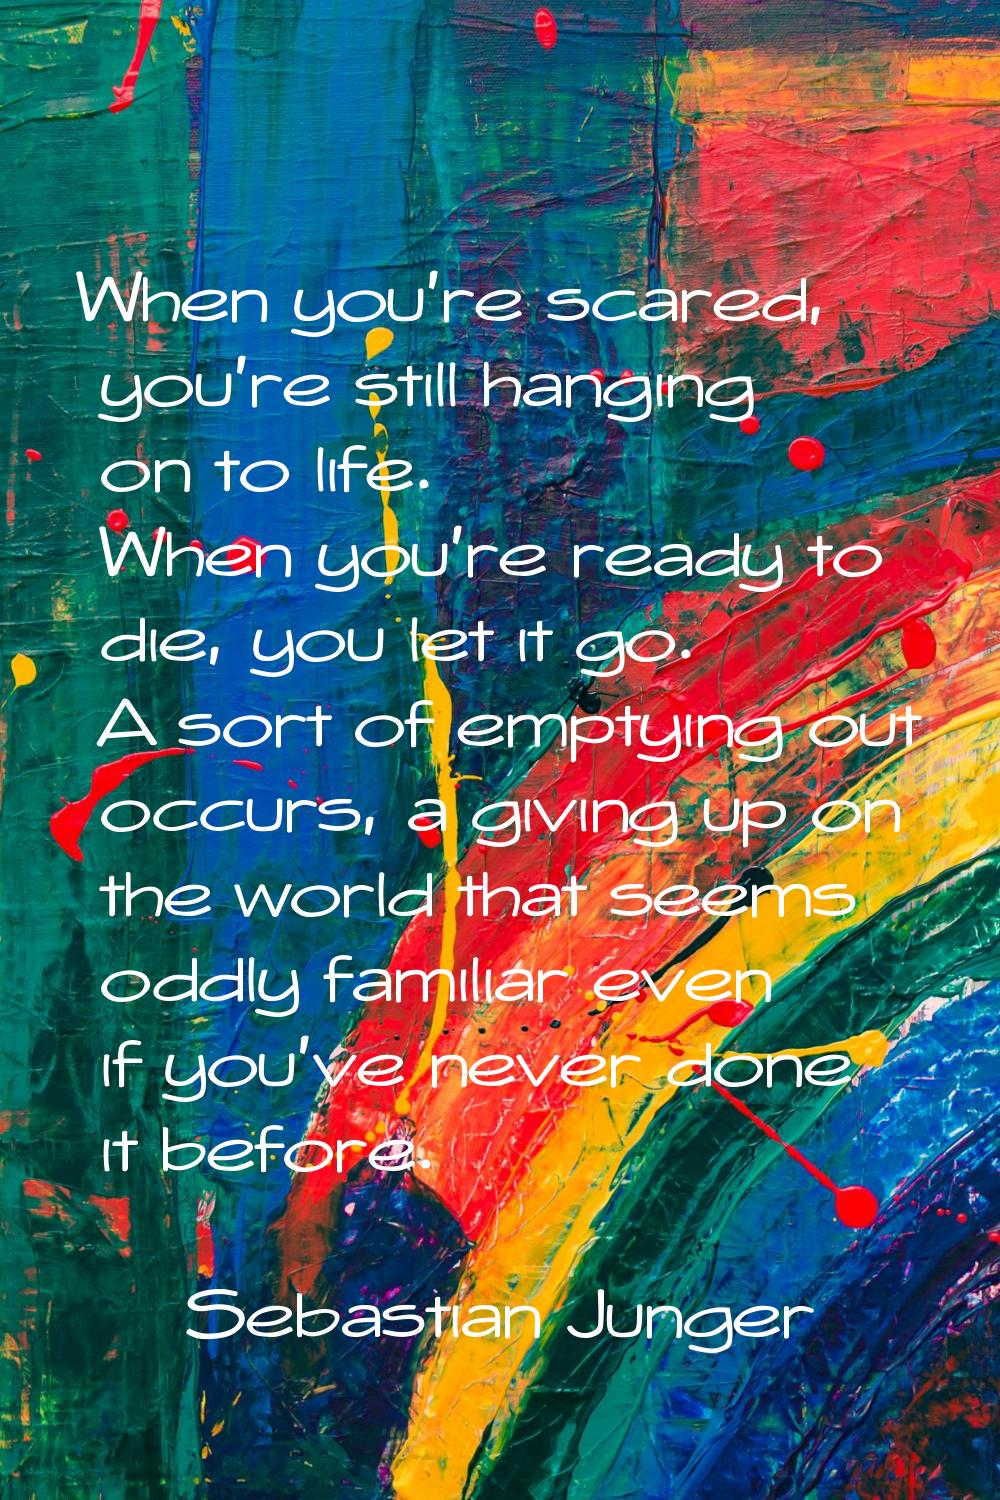 When you're scared, you're still hanging on to life. When you're ready to die, you let it go. A sor